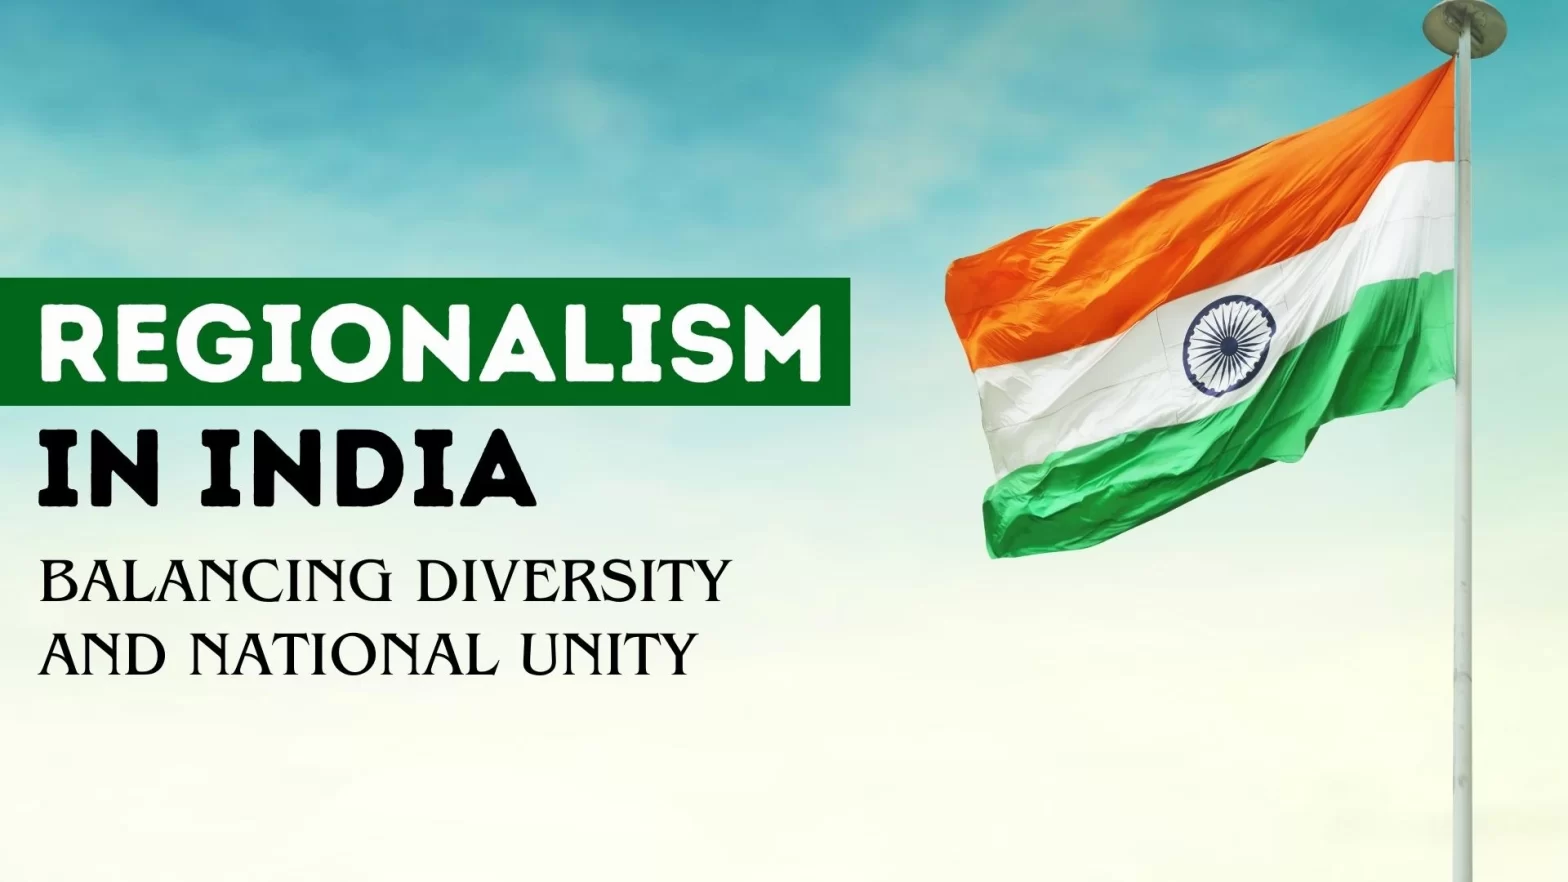 Regionalism in India: Balancing Diversity and National Unity